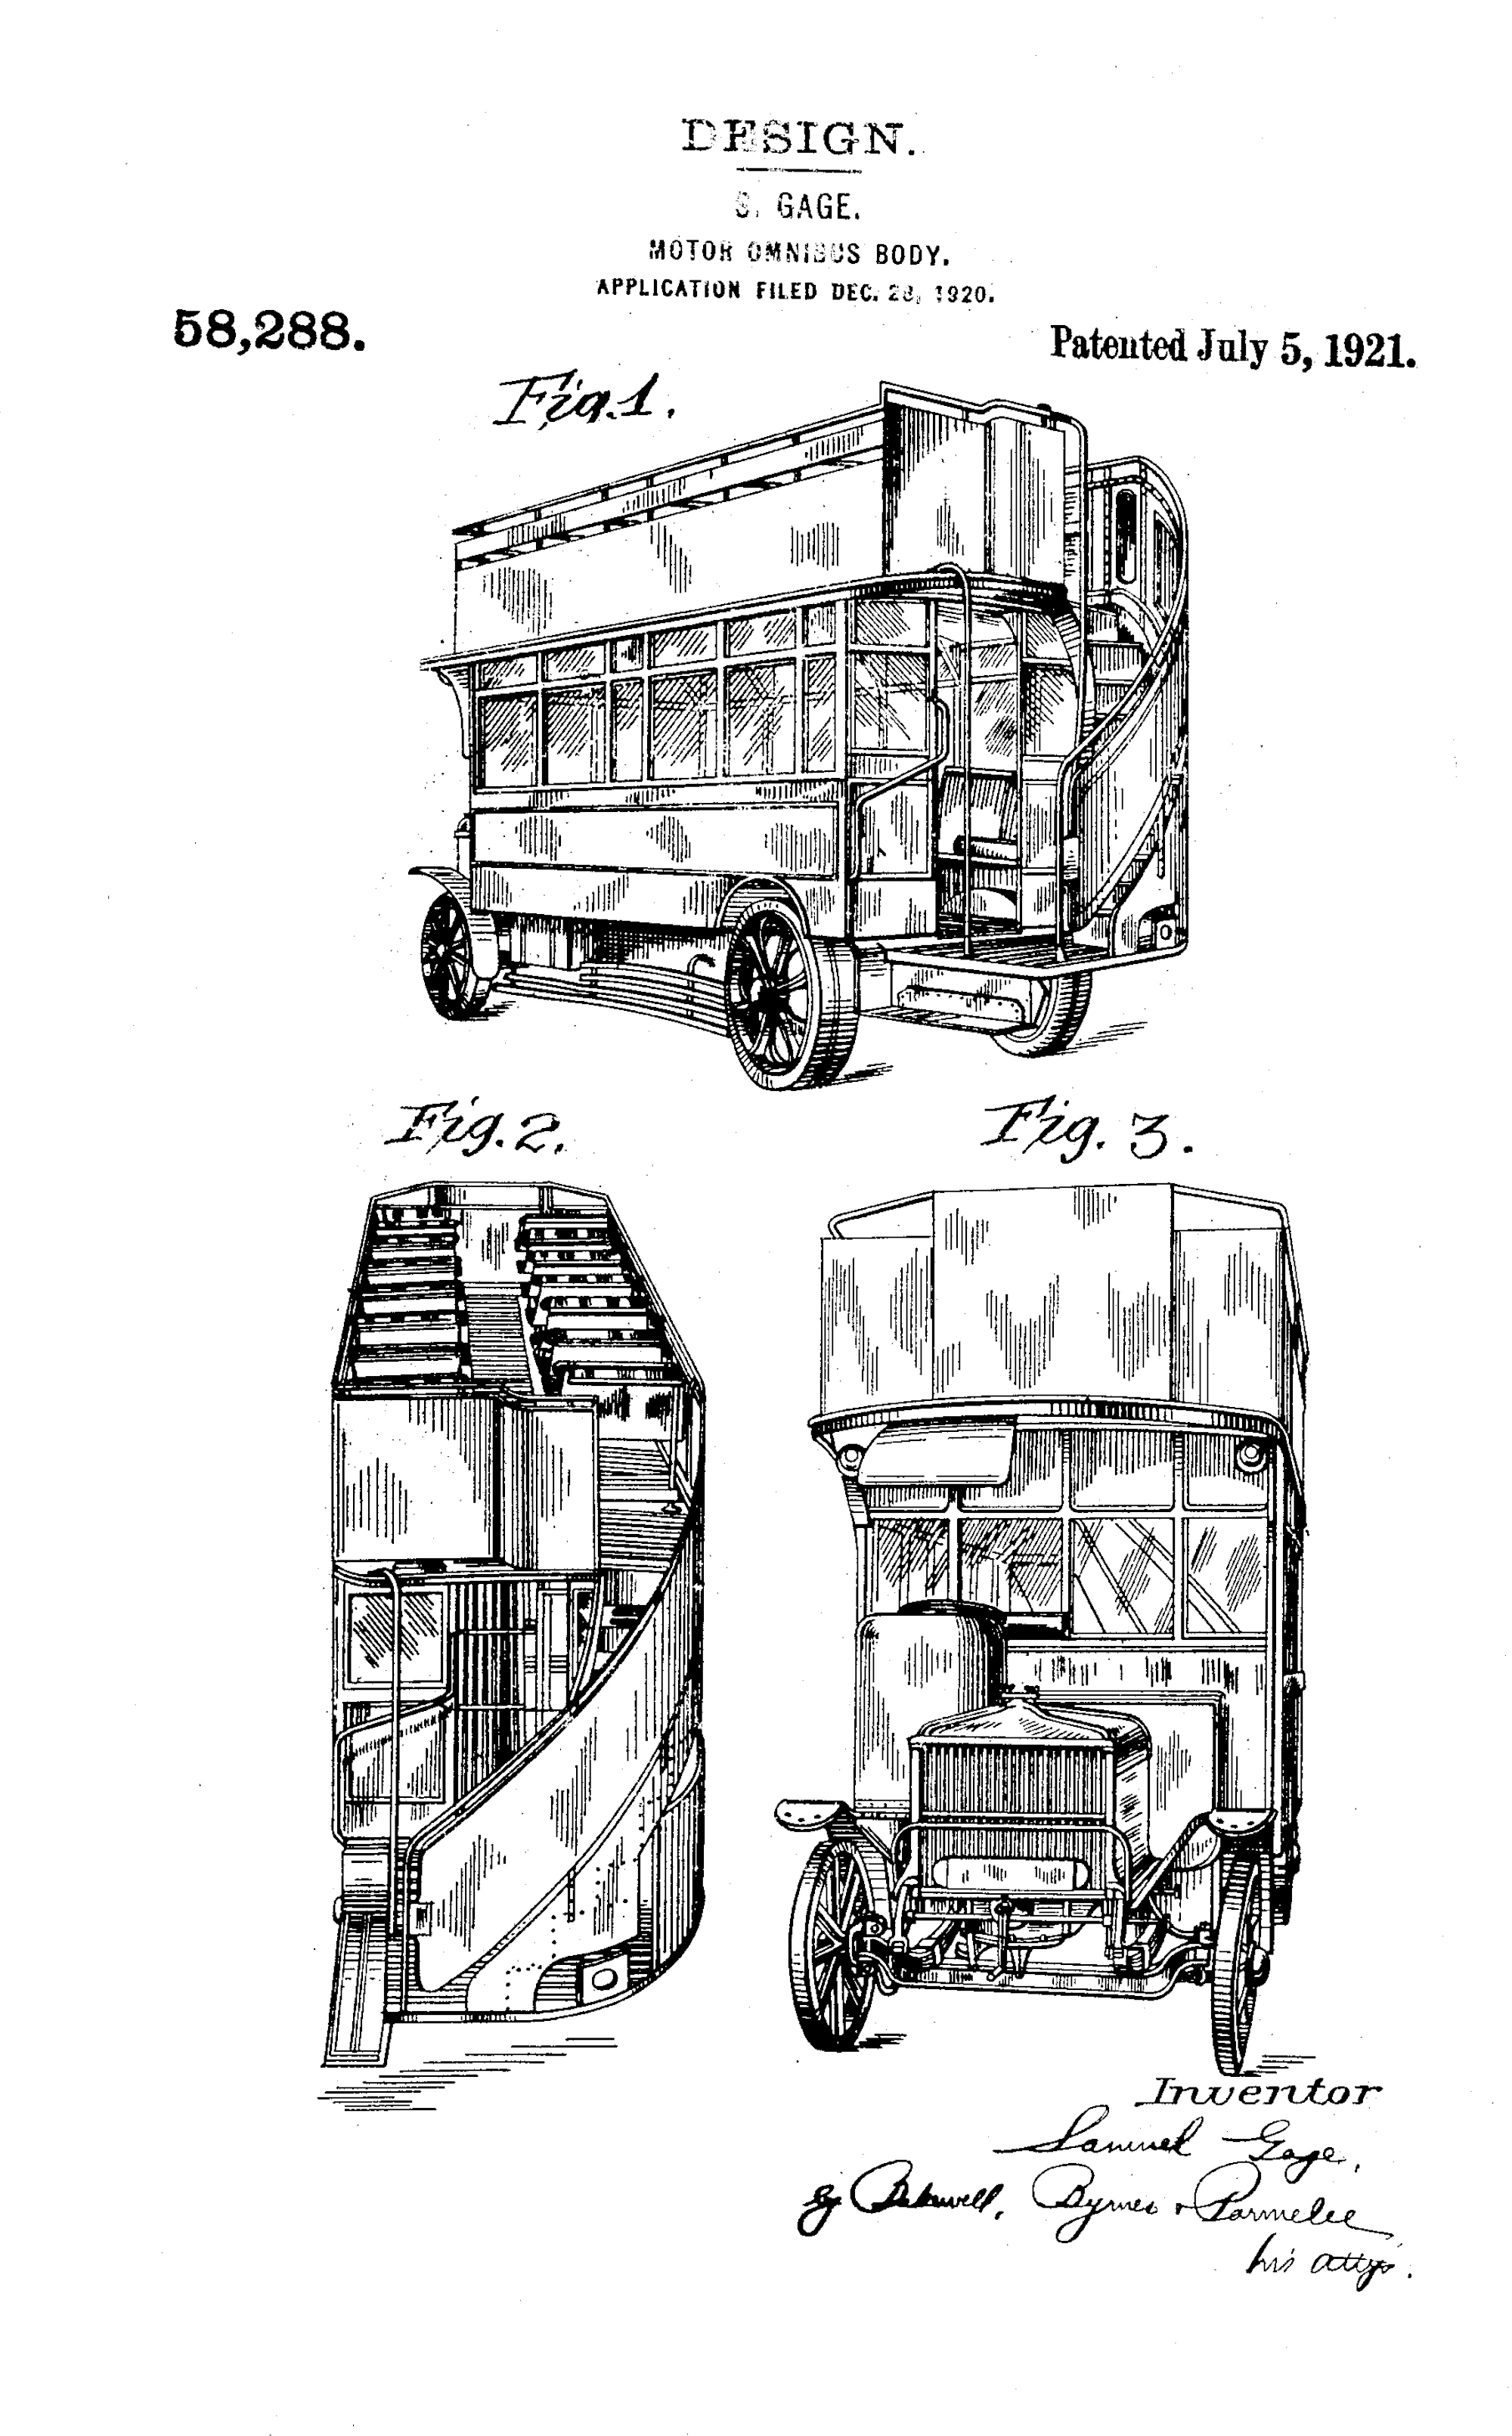  Motor Omnibus Body, Samuel Gage, for the London General Omnibus Company, 1920/1921. Patent Number: USD 58,288, U.S. Patent Office